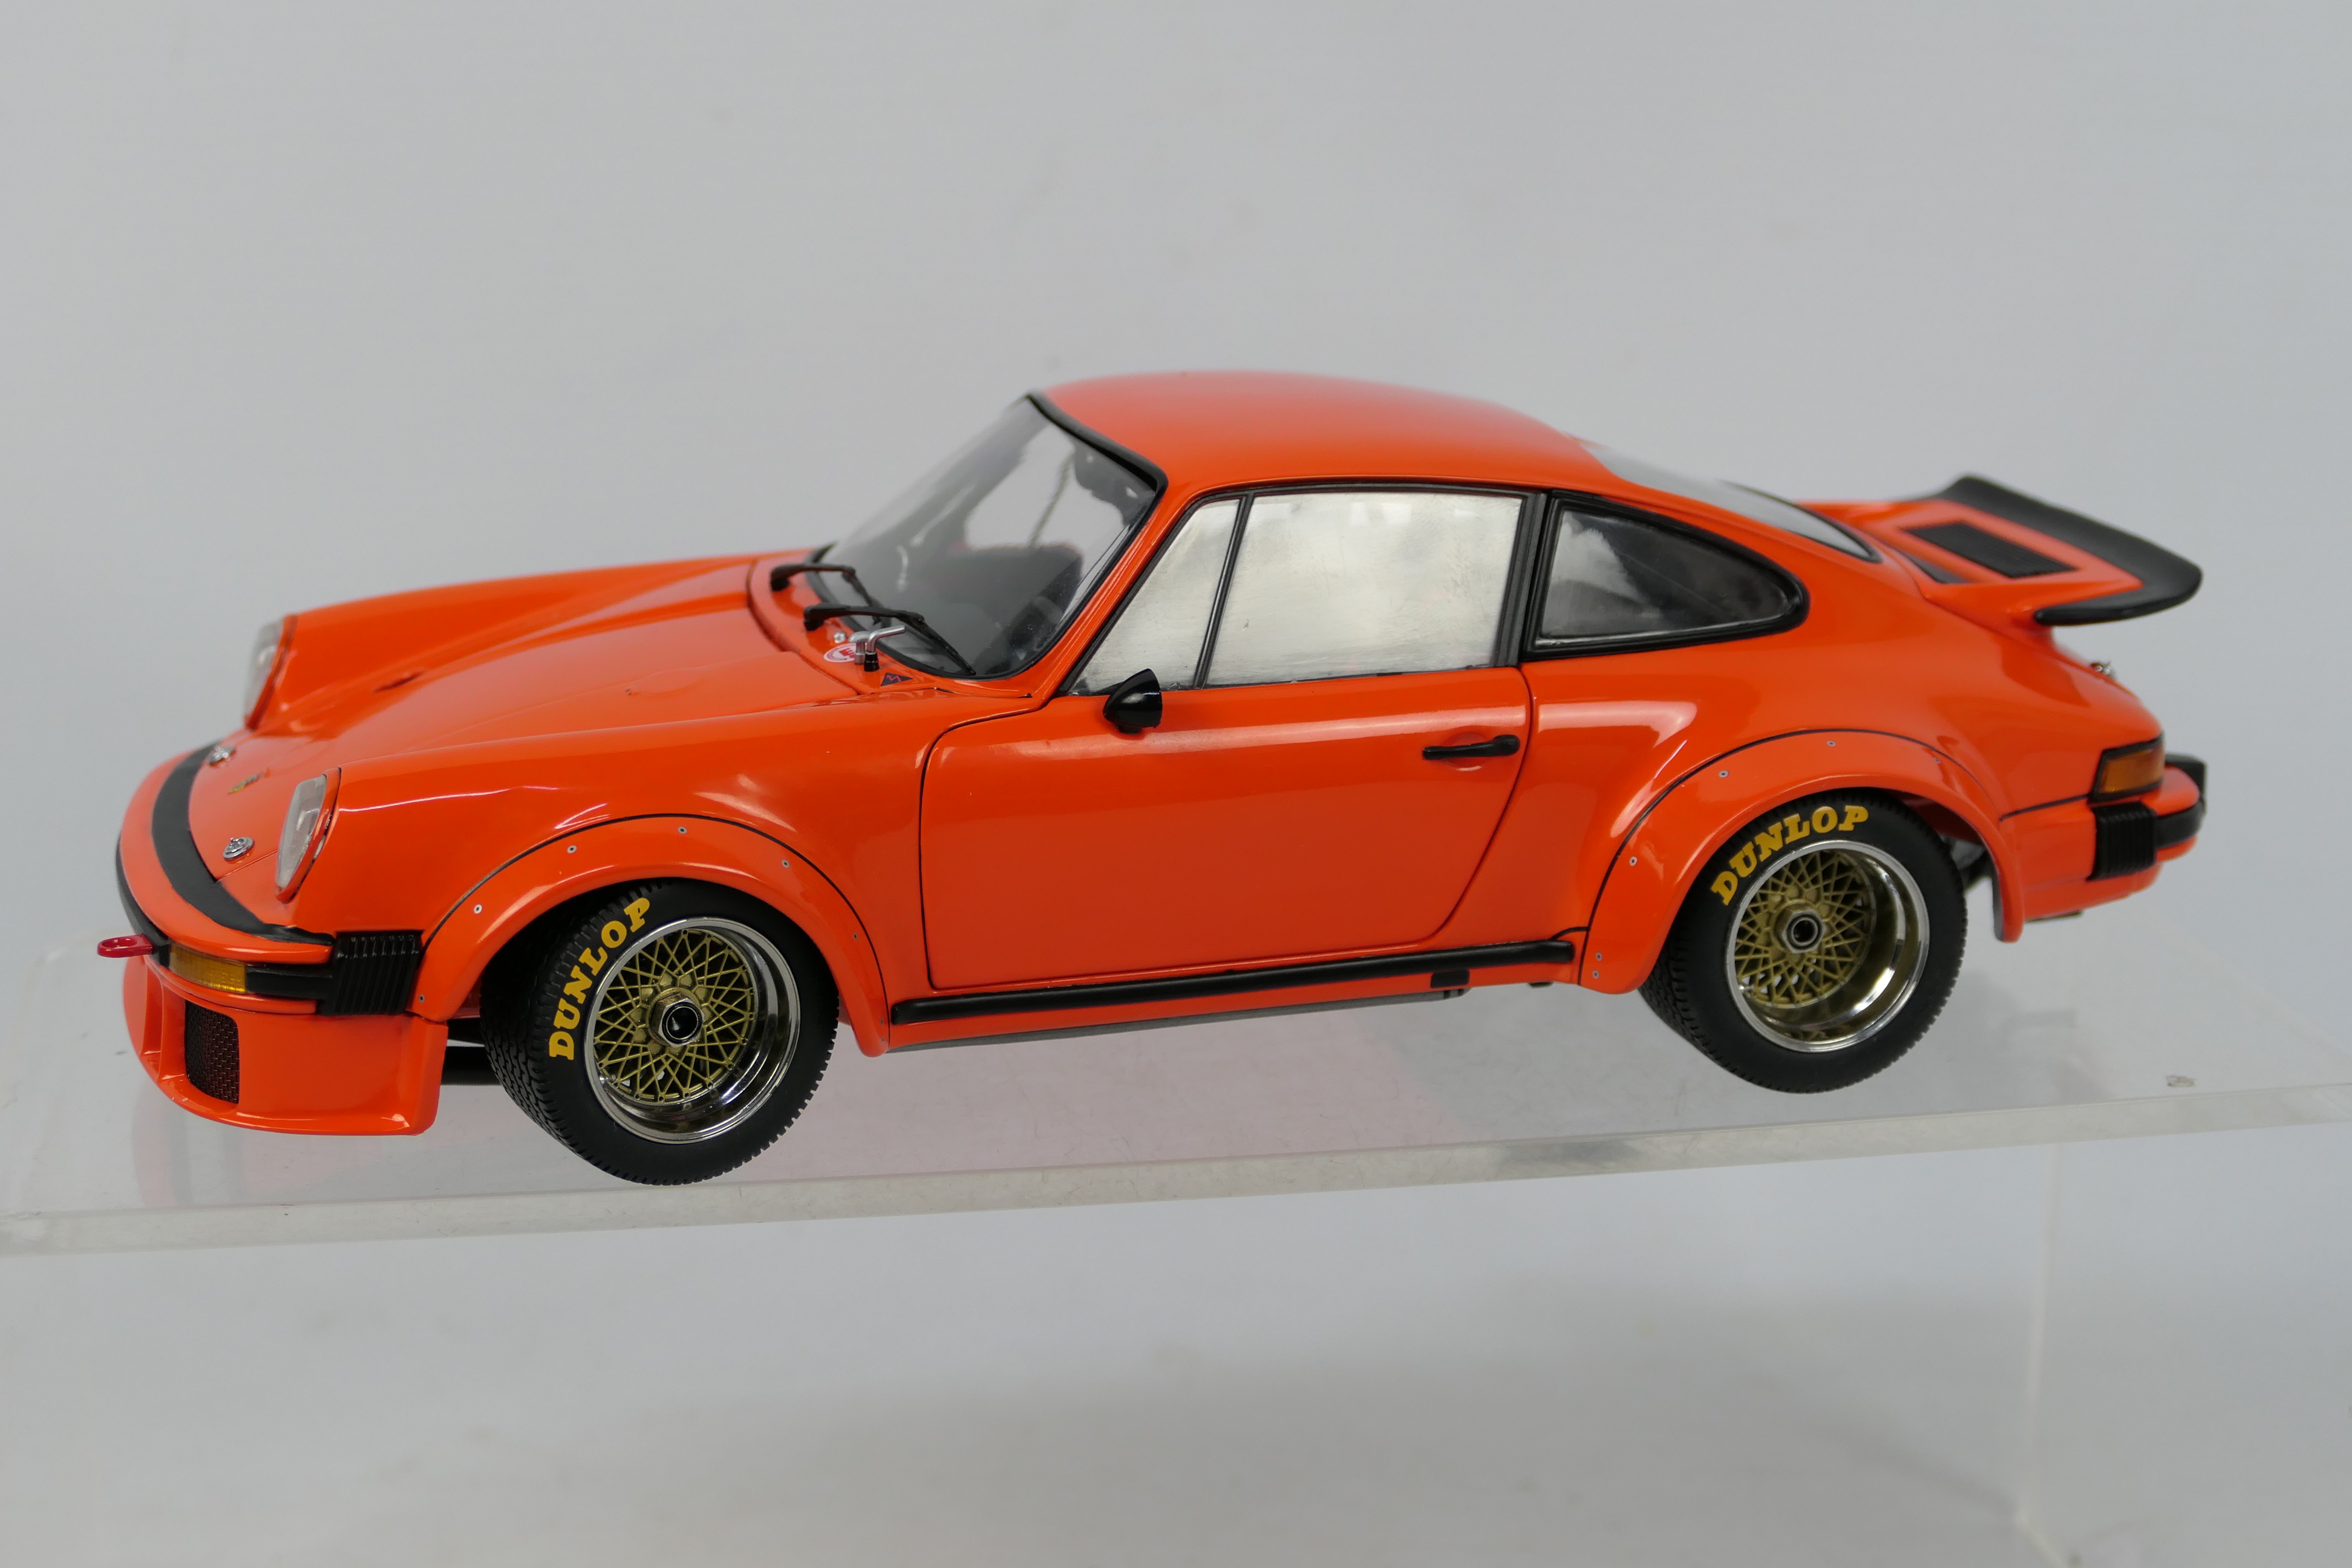 Exoto - Racing Legends - A boxed 1976 Porsche 934 Turbo RSR in 1:18 scale # 18092. - Image 3 of 5